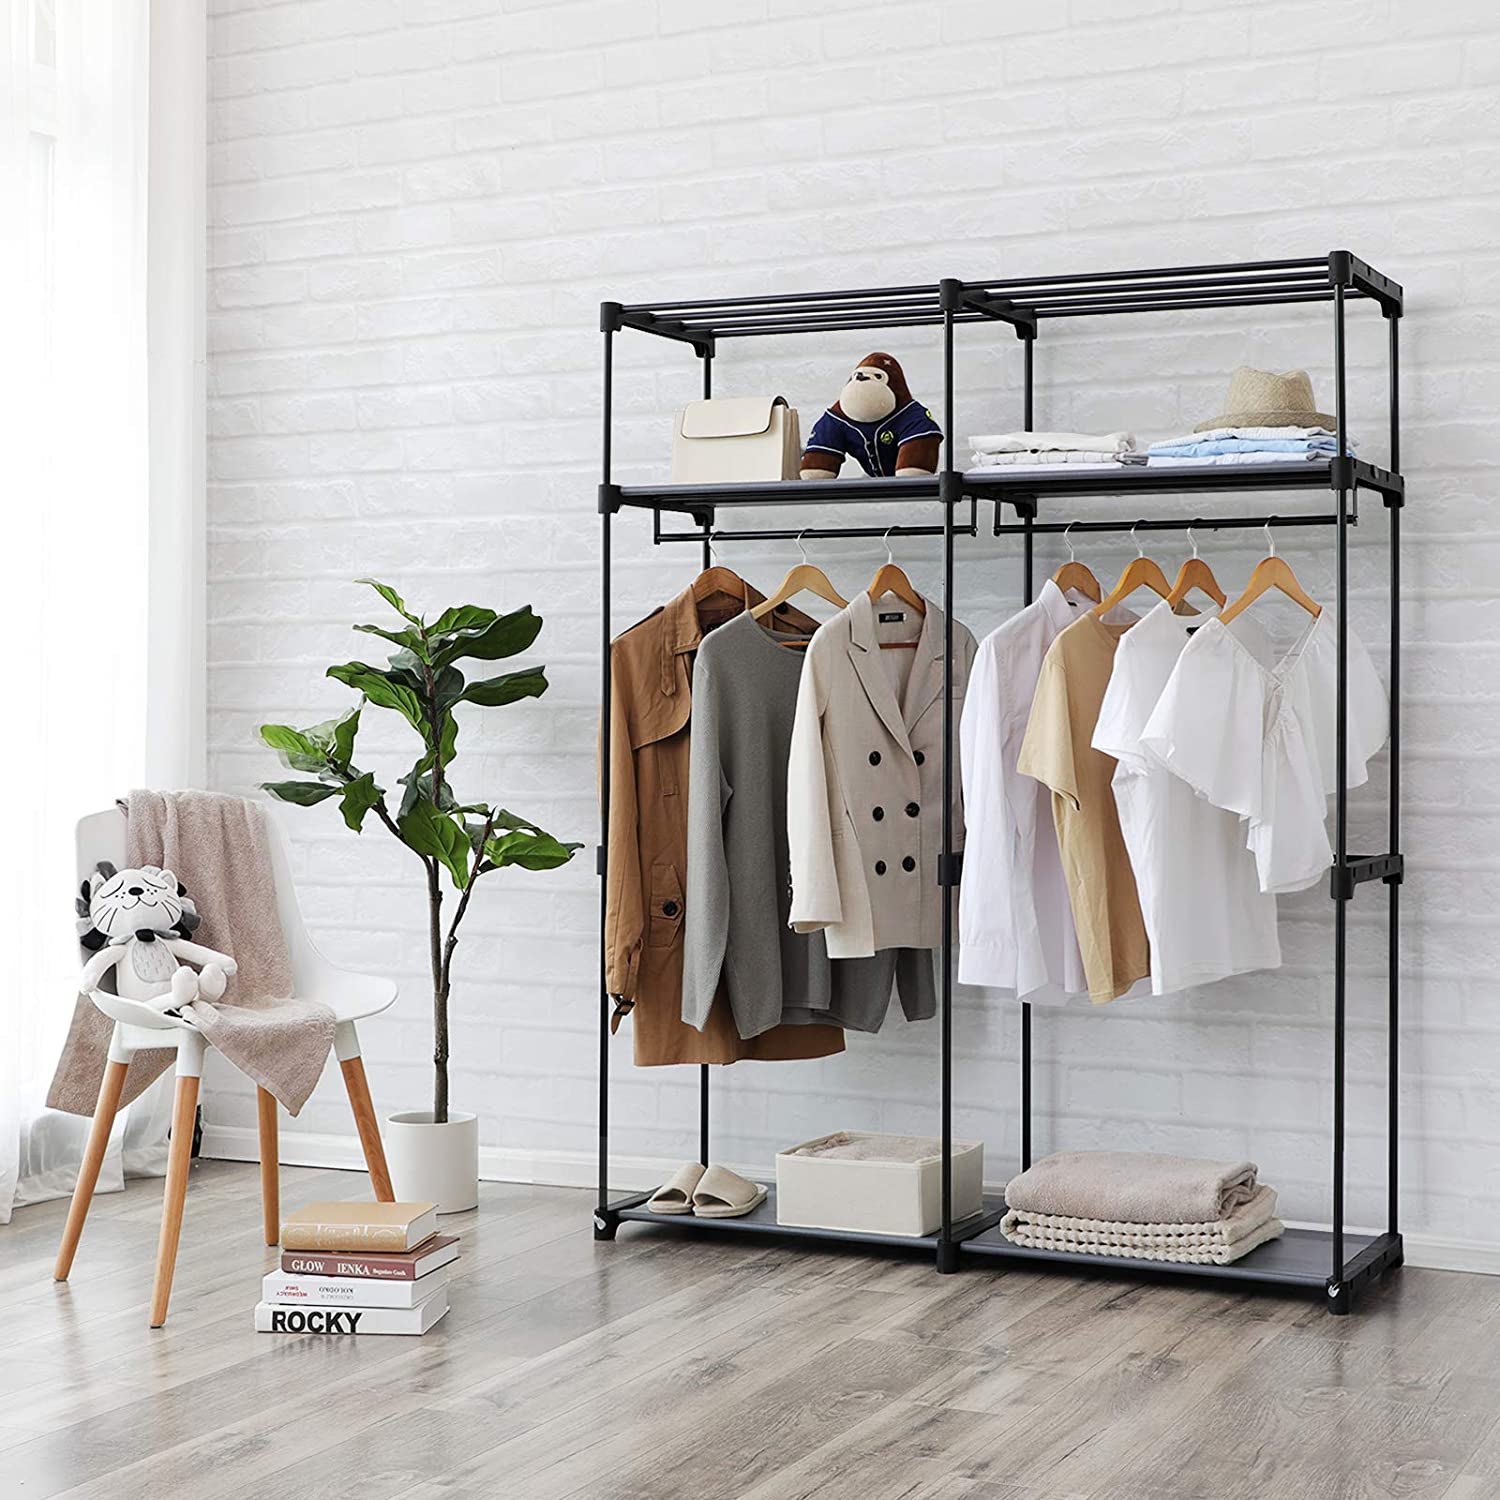 Portable Free-Standing Multi-Purpose Wardrobe with Breathable Non-Woven Fabric Shelves